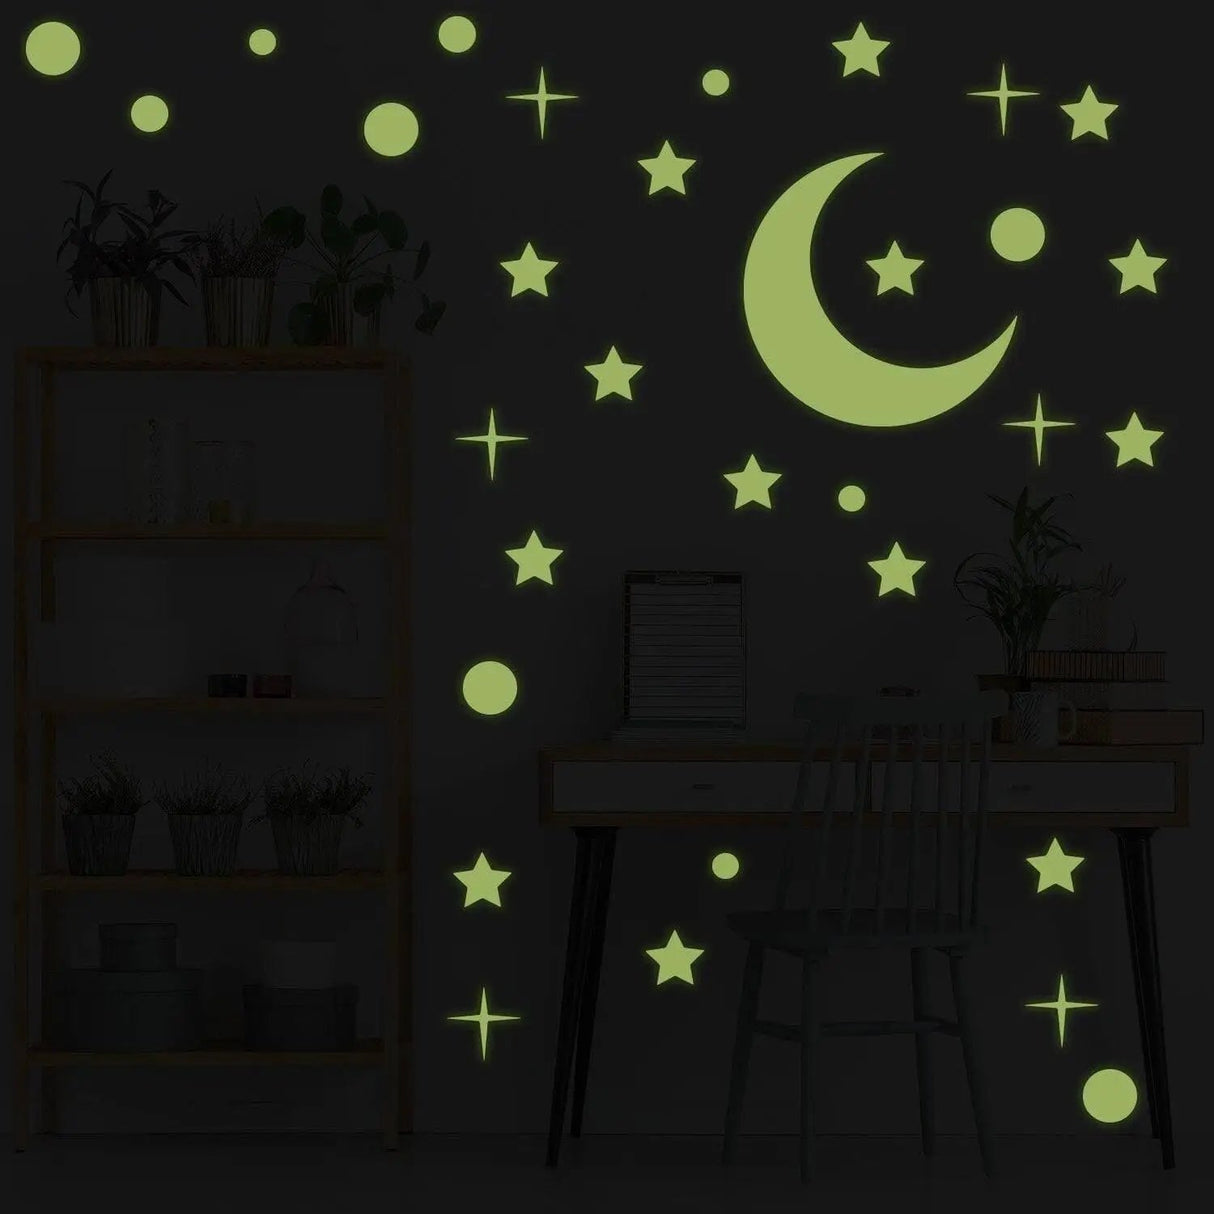 Glowing Ceiling Stickers- Starry Sky Wall Decal - Glow in the Dark Stars Crescent Sticker - Moonlight Luminescent Mural + Free Decal Gift! - Decords